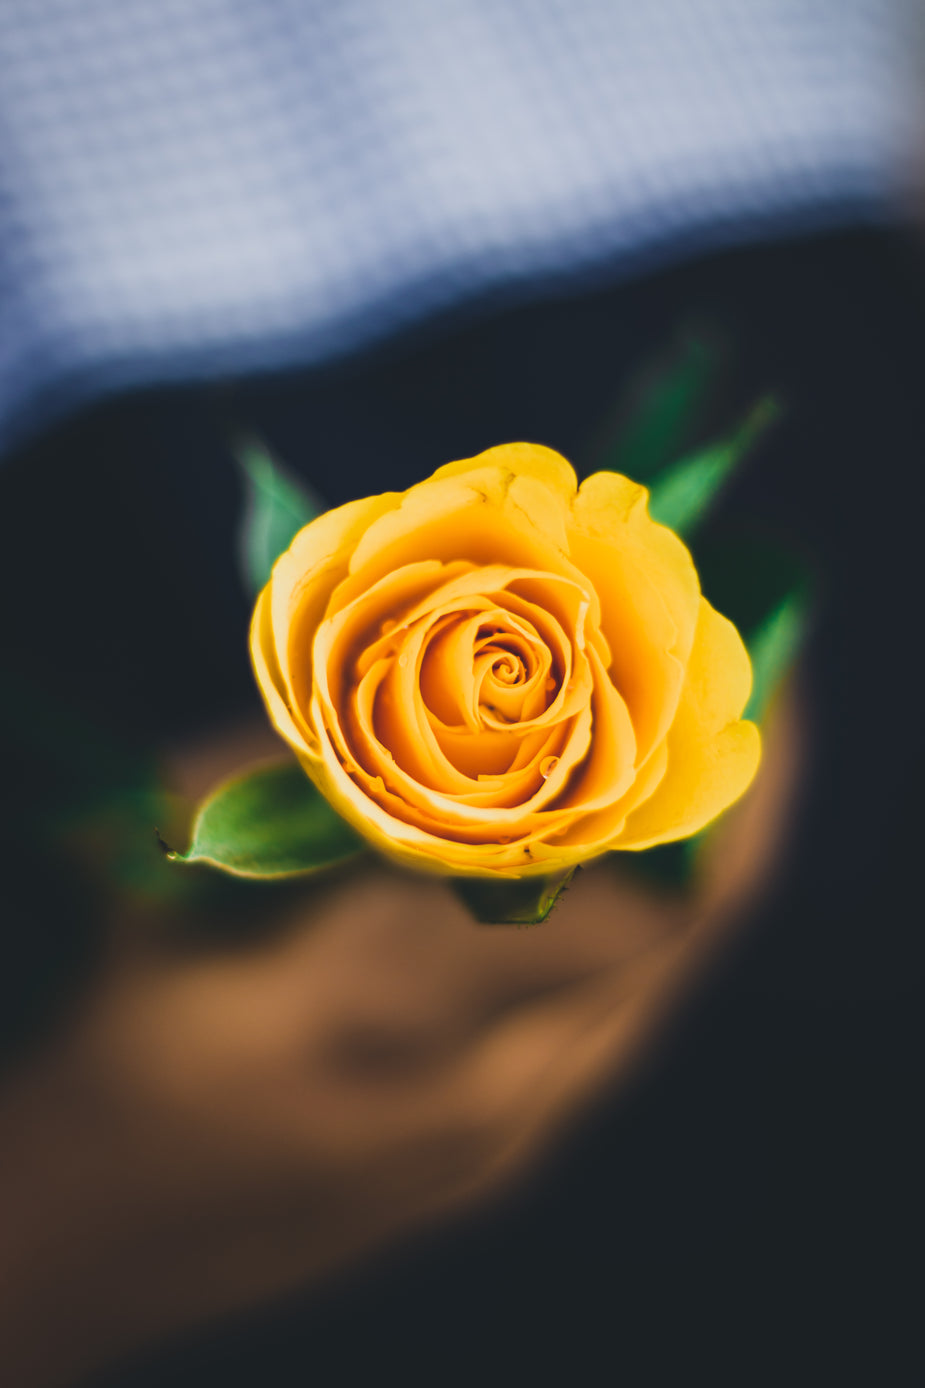 Images Of Bright Yellow Rose